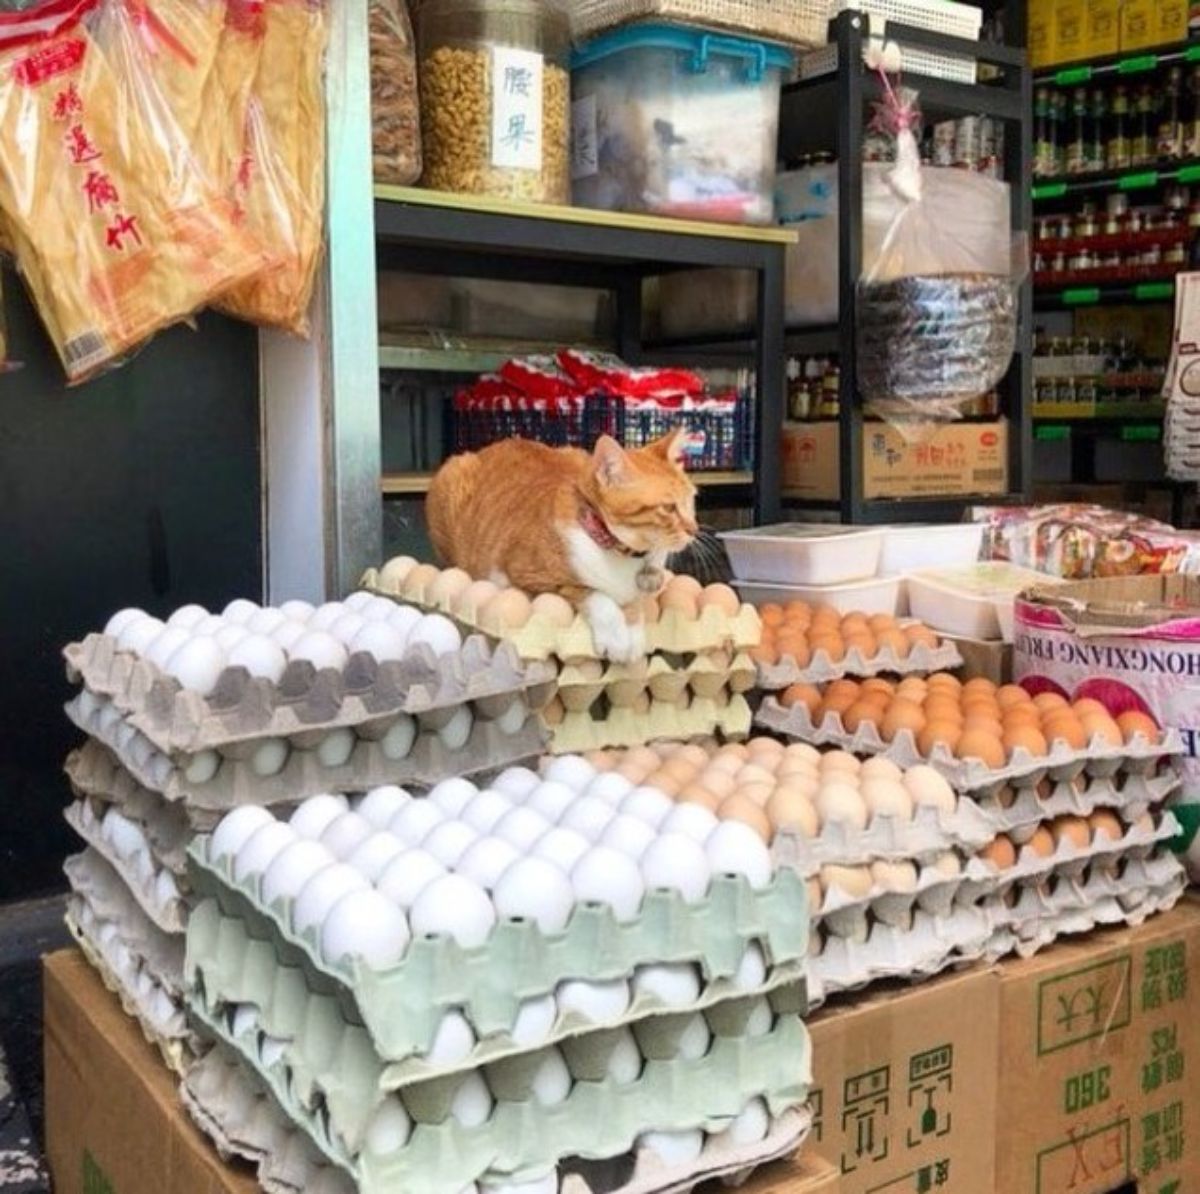 orange and white cat sitting on a pile of eggs